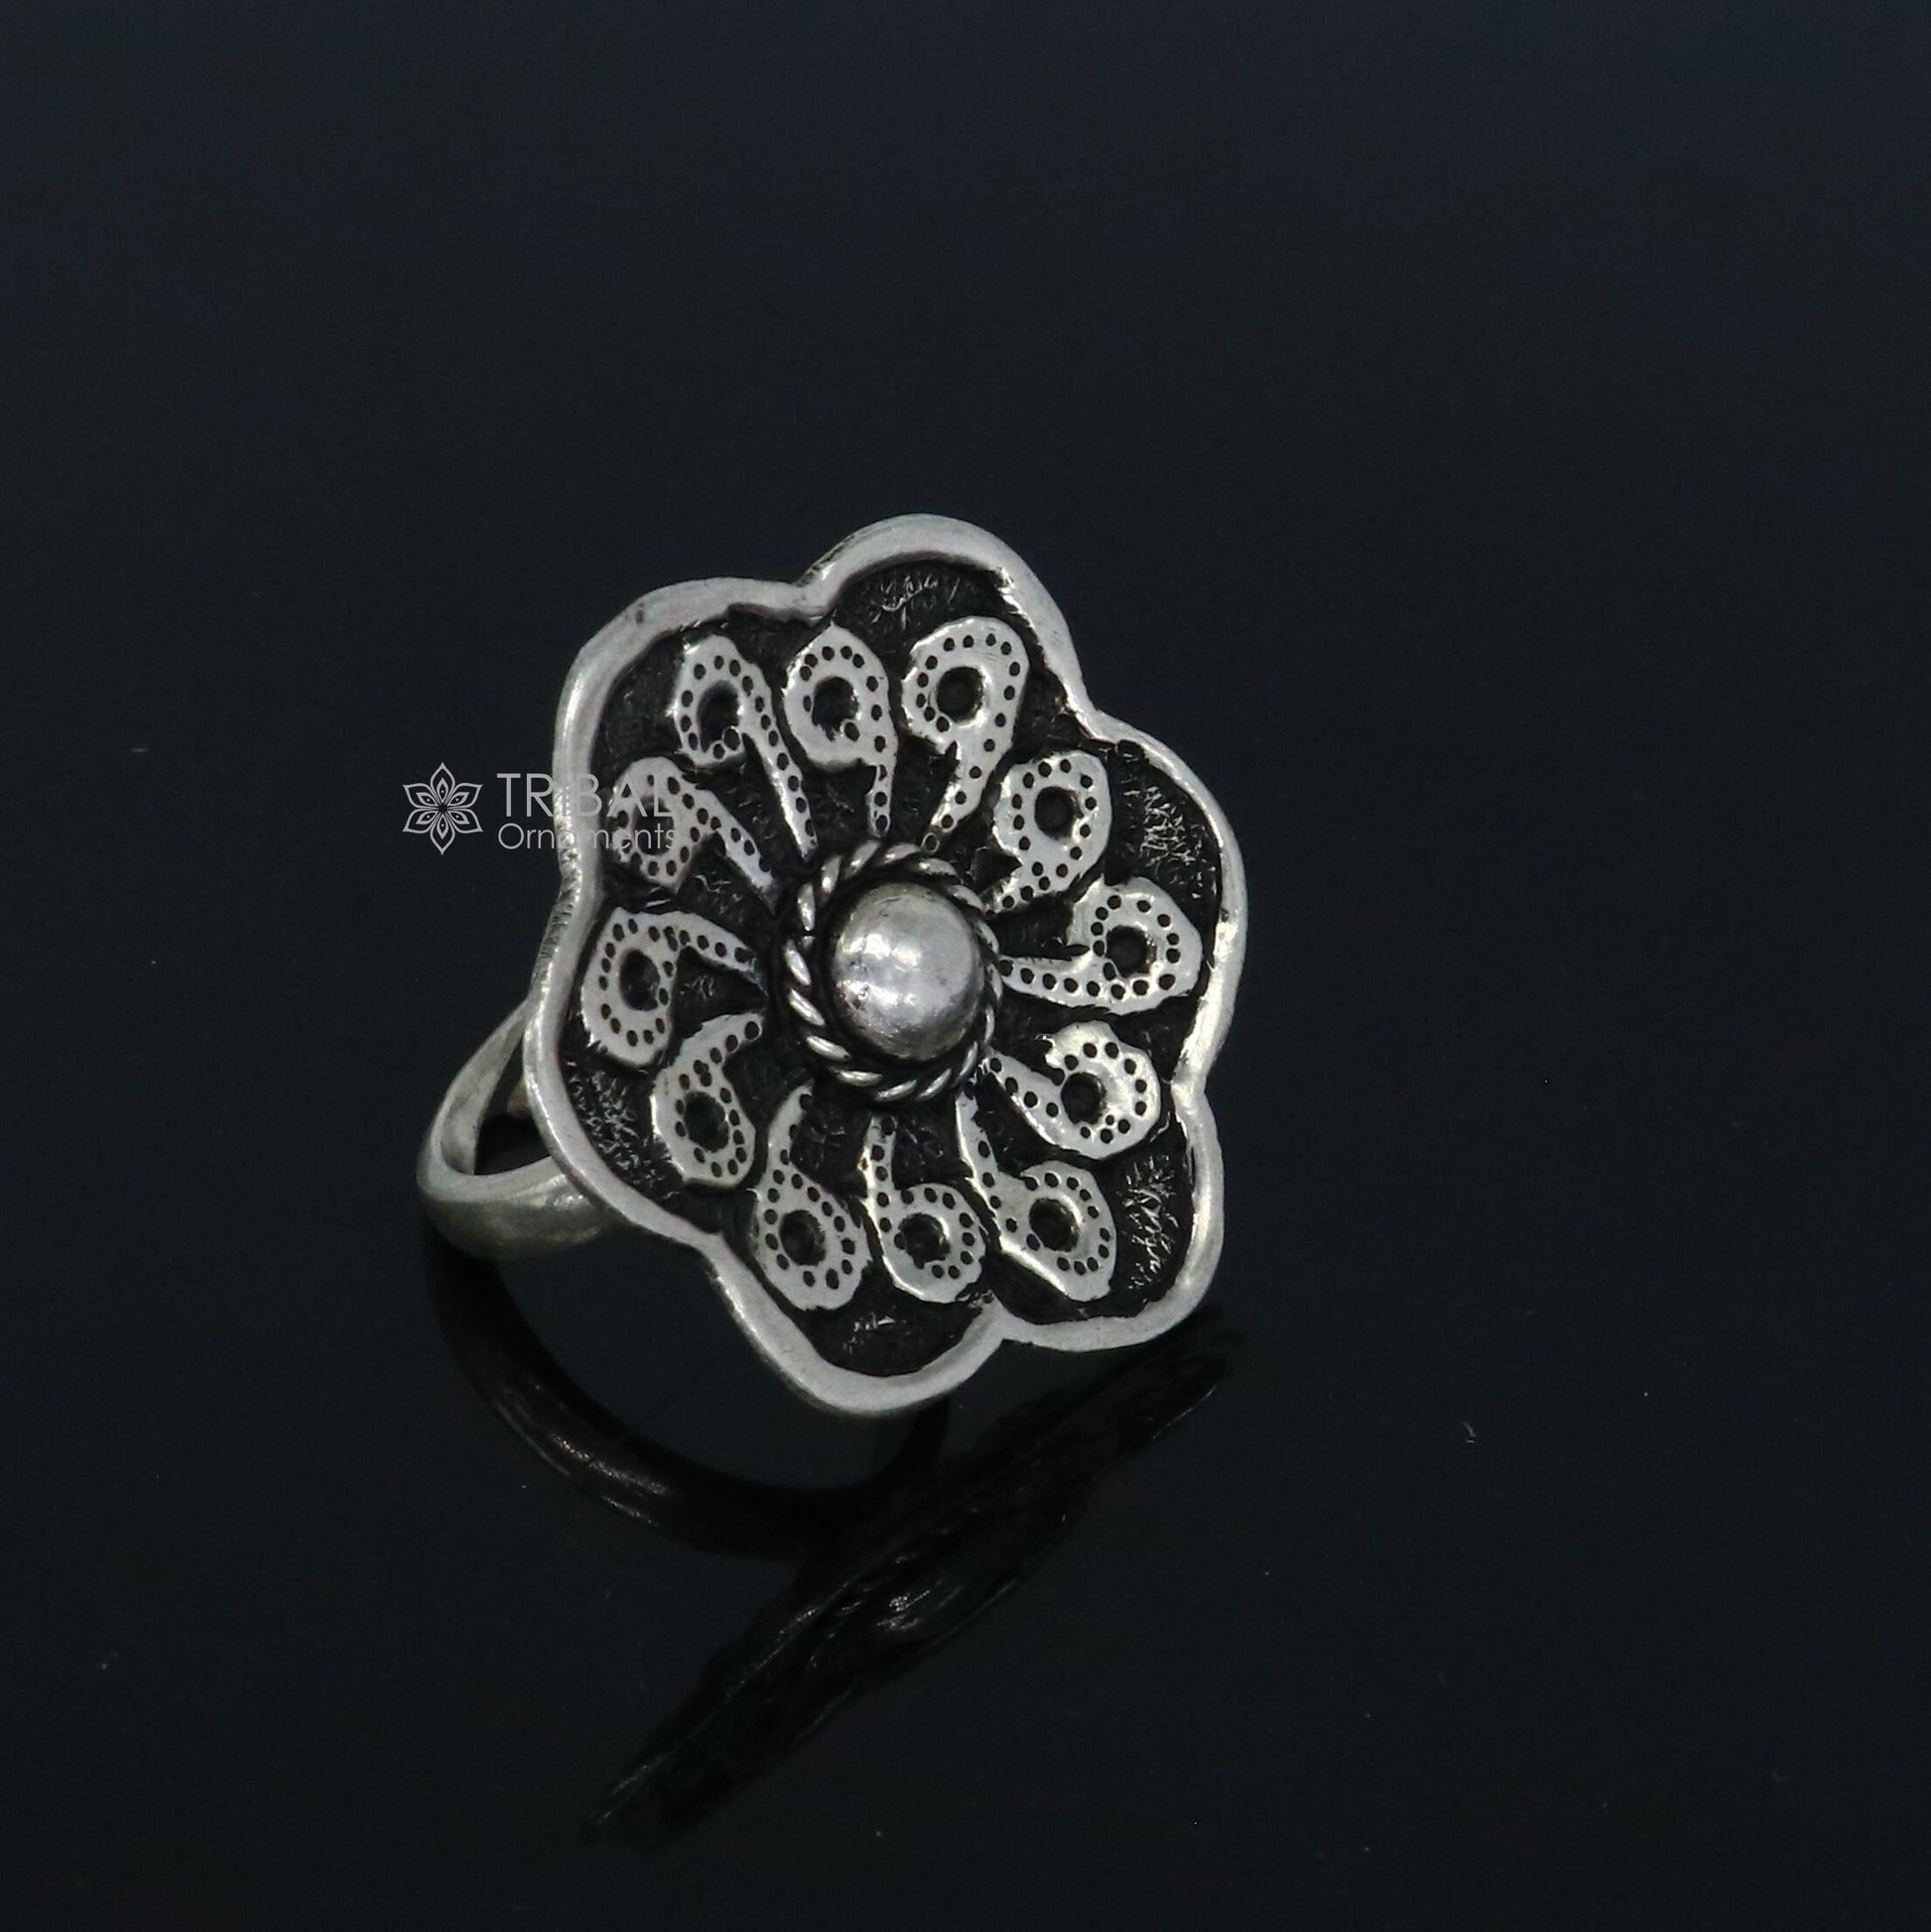 Traditional cultural flower design 925 sterling silver adjustable ring, best tribal ethnic jewelry for belly dance Navratri jewelry sr386 - TRIBAL ORNAMENTS